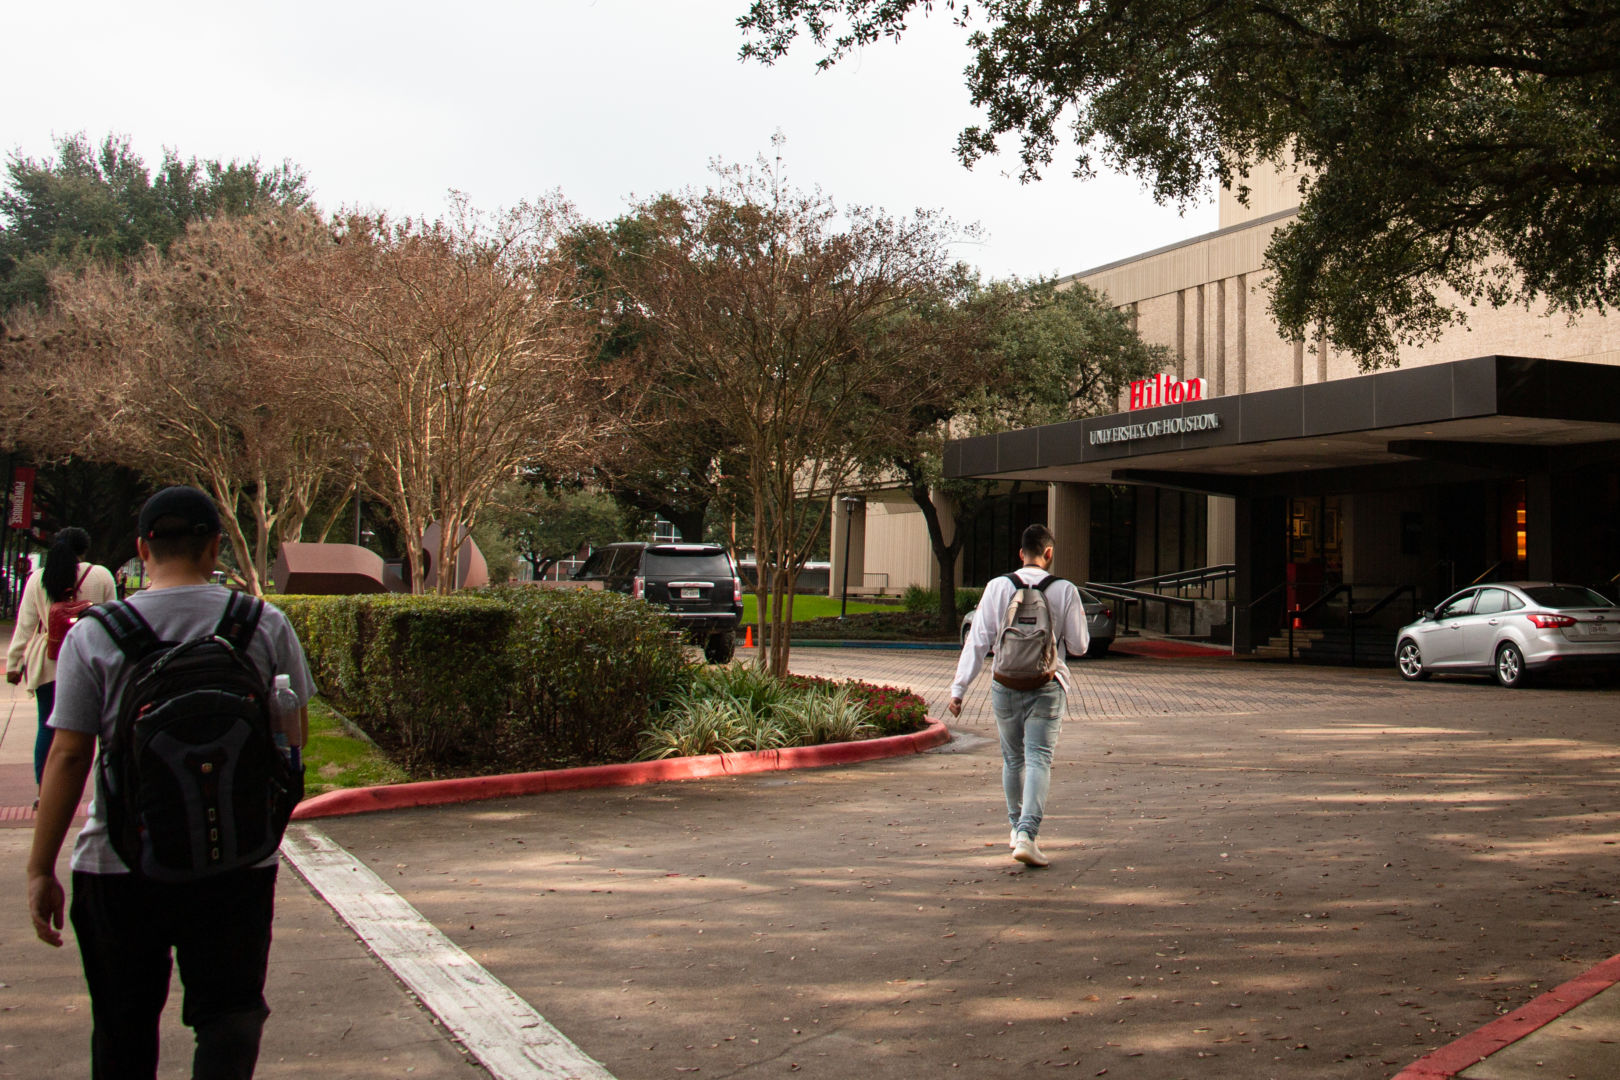 The Hilton College attracts students from around the globe to study at the University of Houston. | File photo/The Cougar